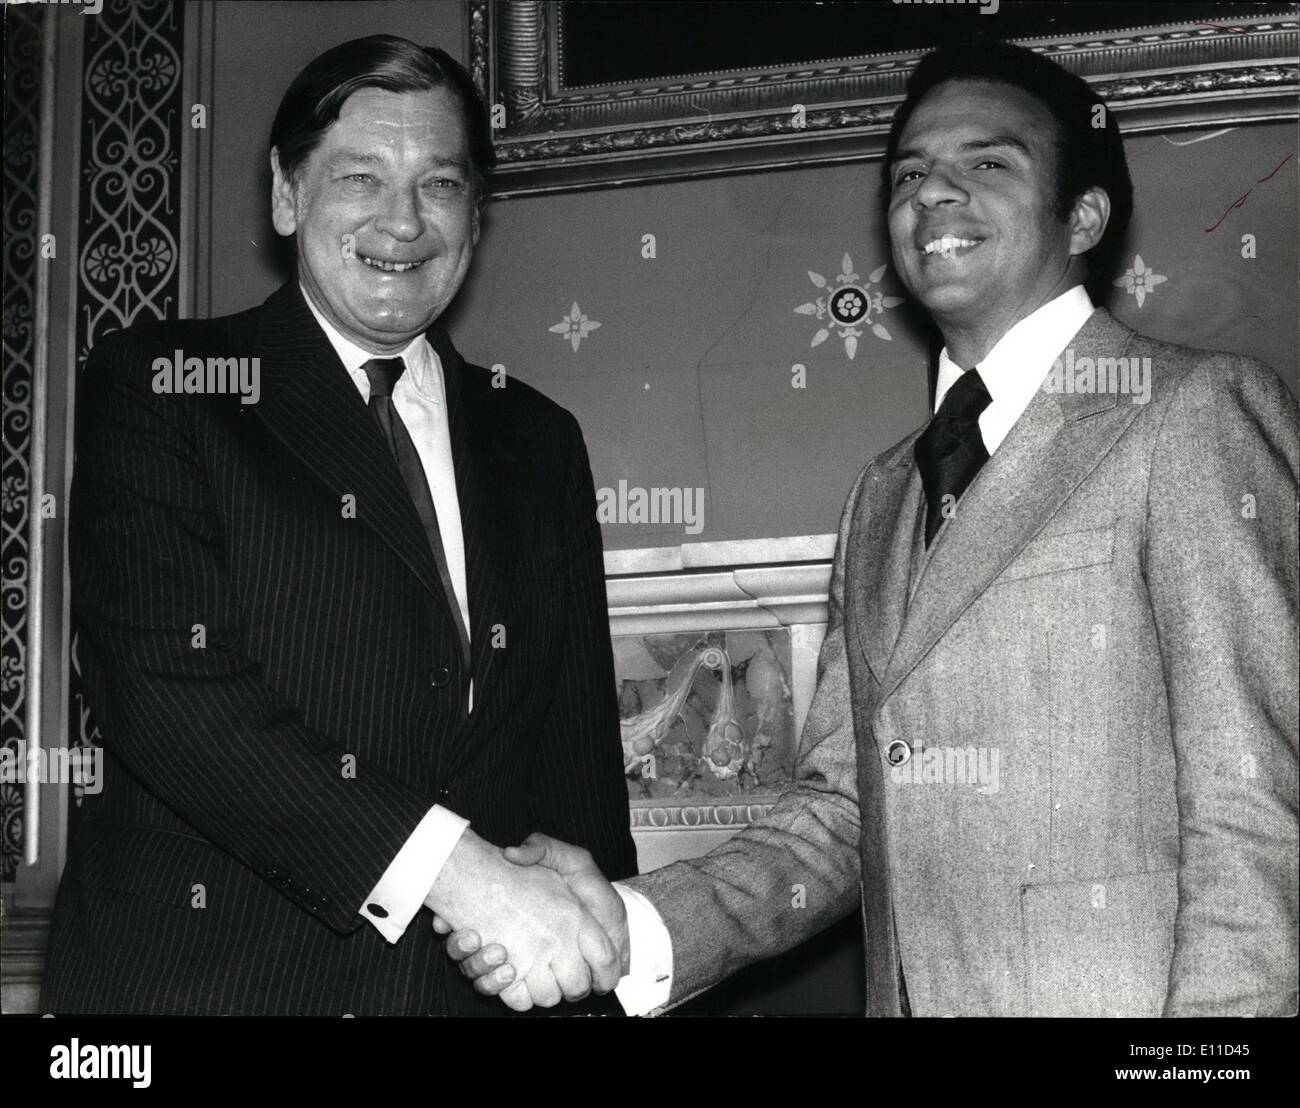 Feb. 02, 1977 - Andrew Young United States Ambassador to the U.N. Calls on the Foreign Secretary at the Foreign Office. The new Stock Photo